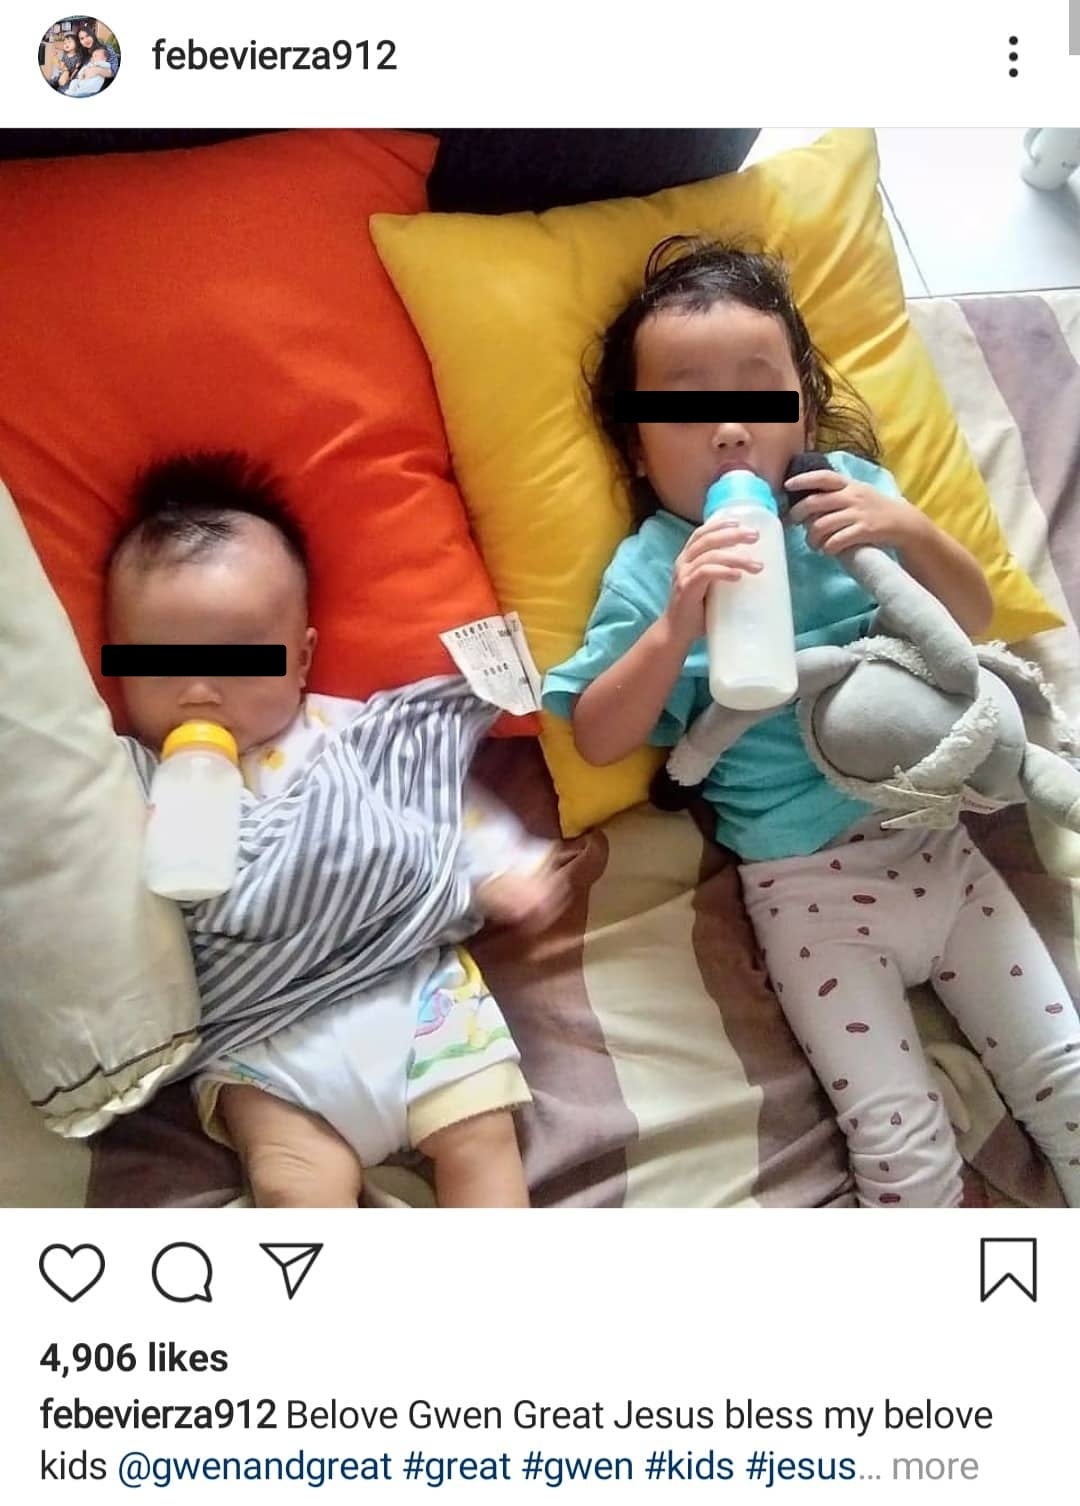 Indonesian Babysitter Adds Sleeping Medicine into Baby's Bottle, Knocking Him Out Until His Mother Notices - WORLD OF BUZZ 4